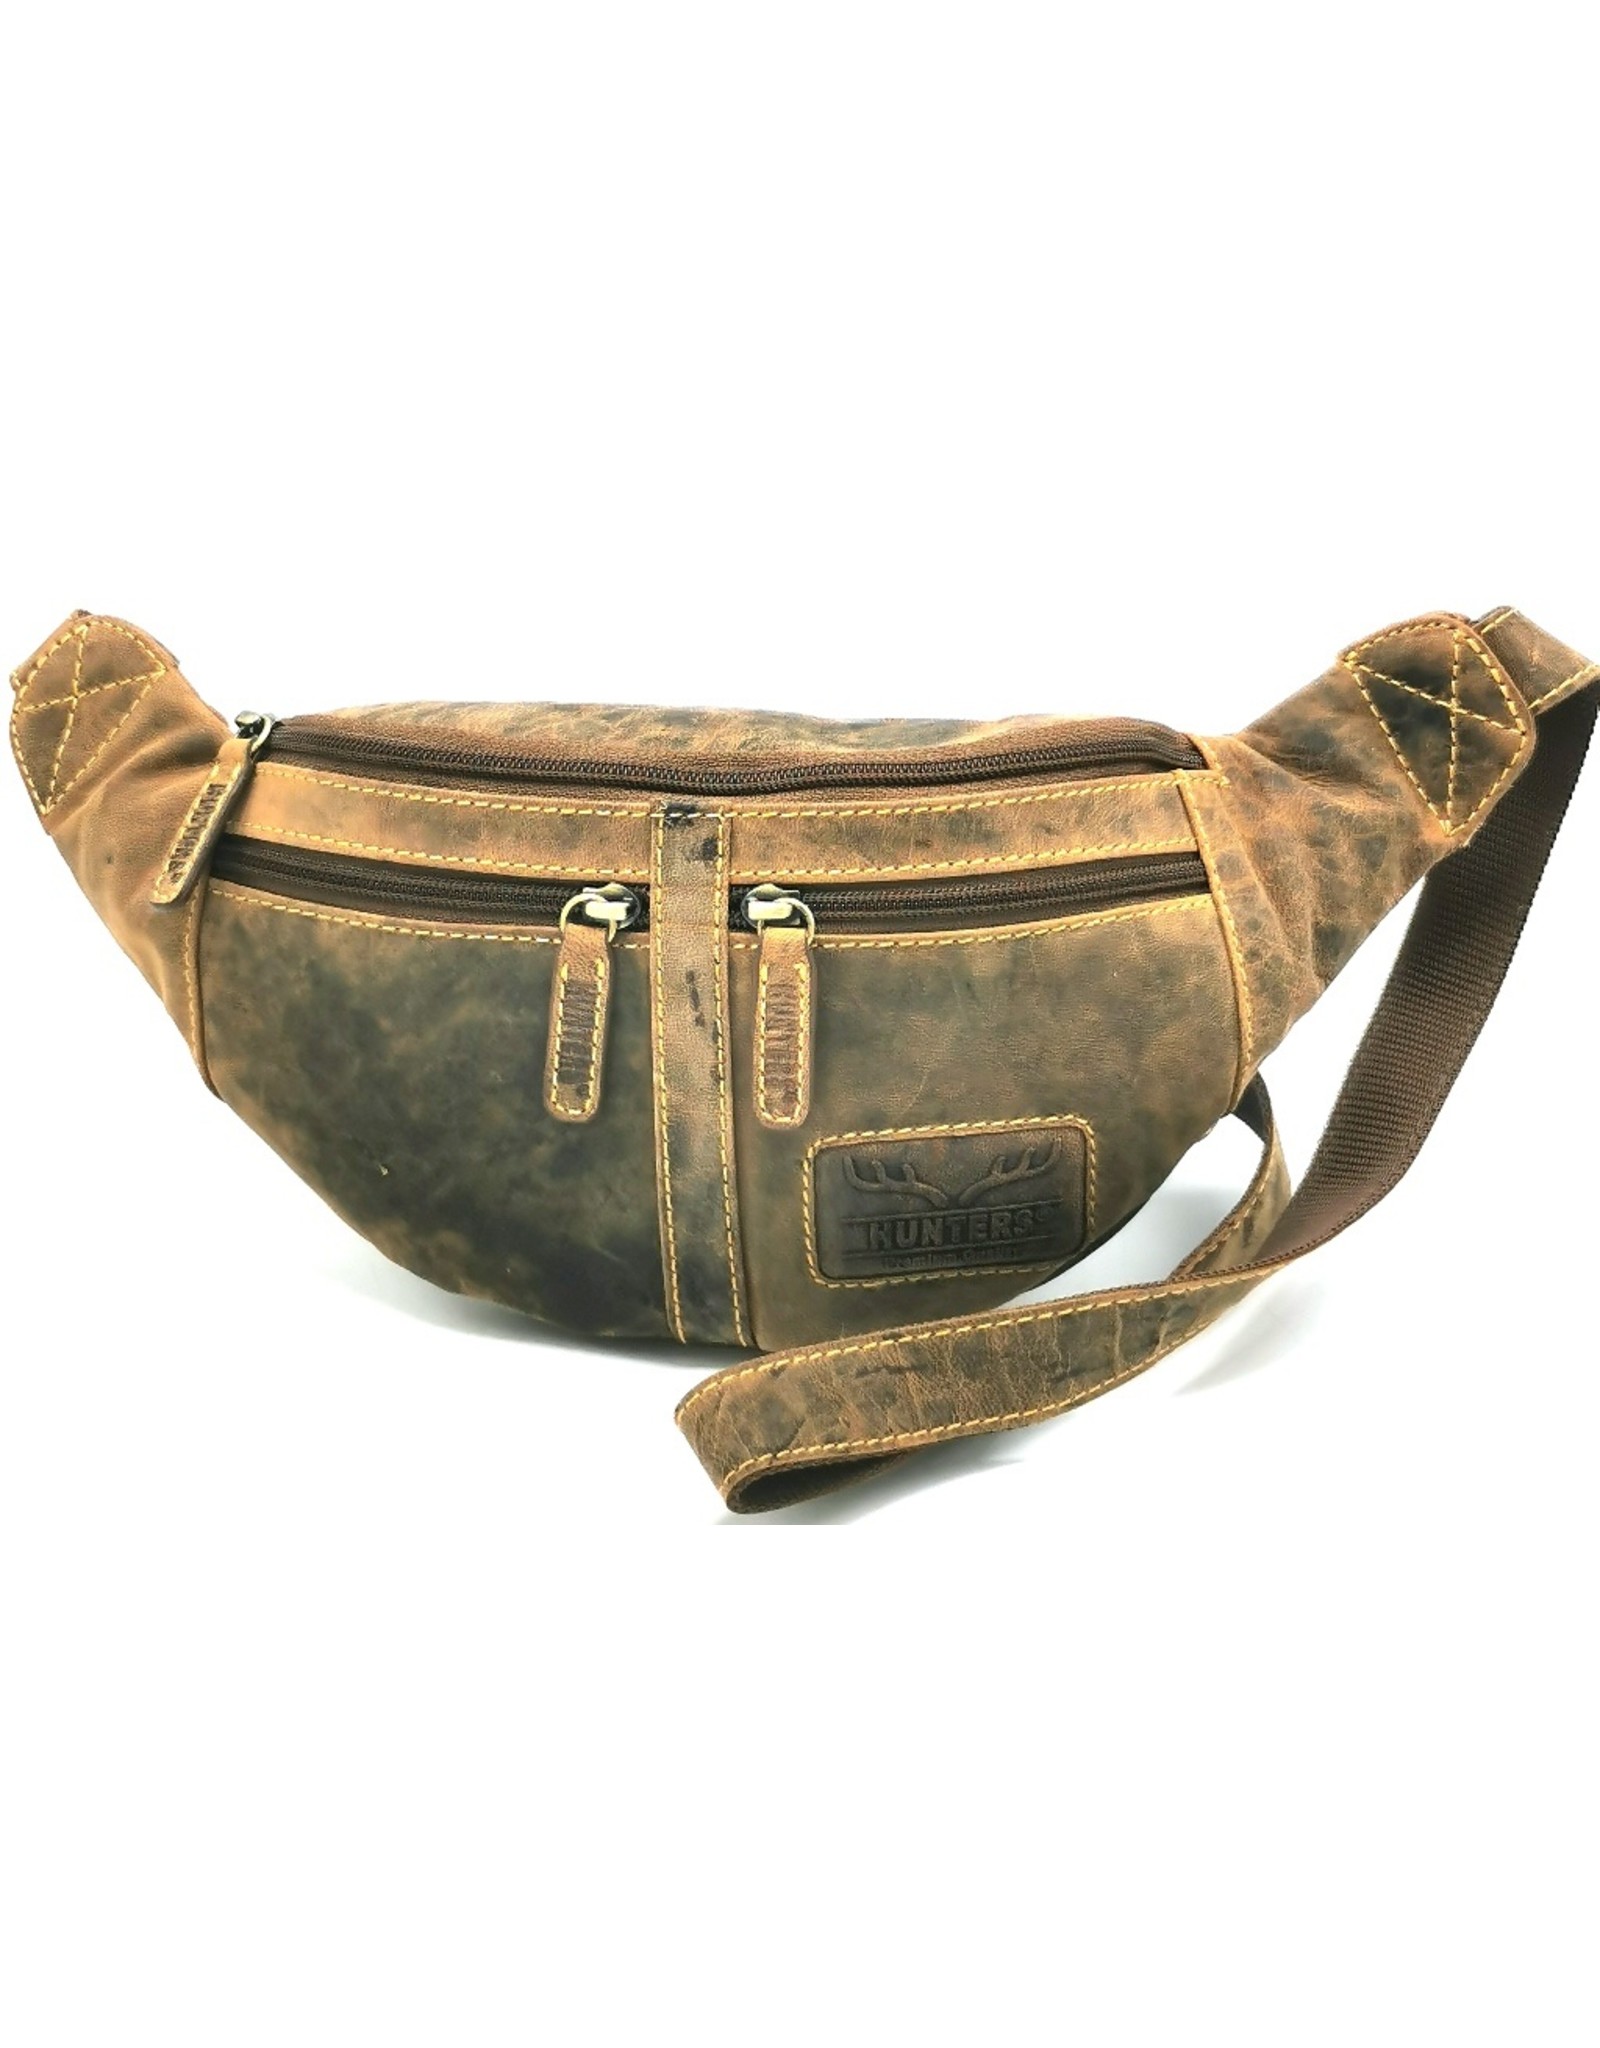 Hunters Leather bags - Hunters Leather Fanny bag  with two zipped pockets  Brown